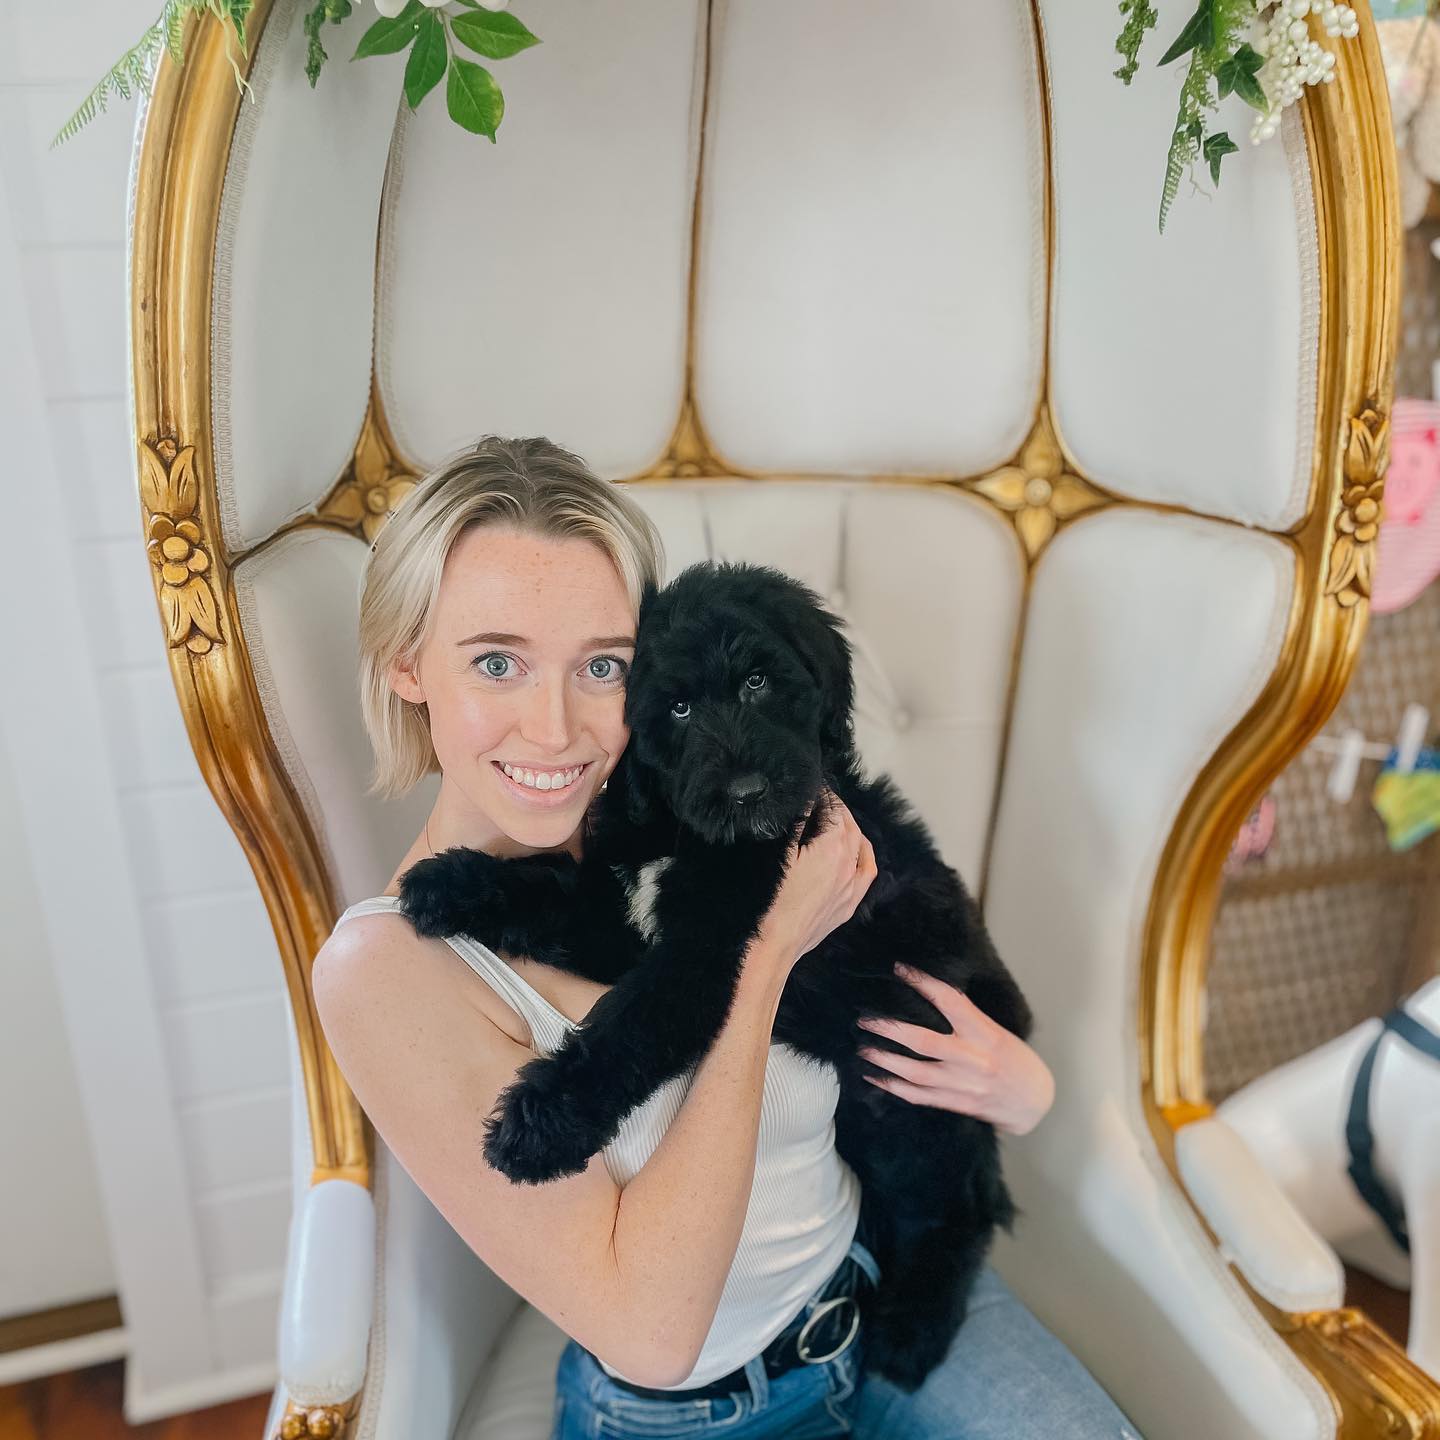 A Smeraglia client holding her new black golden doodle. She's so excited to have this friendly, allergy-friendly family member!